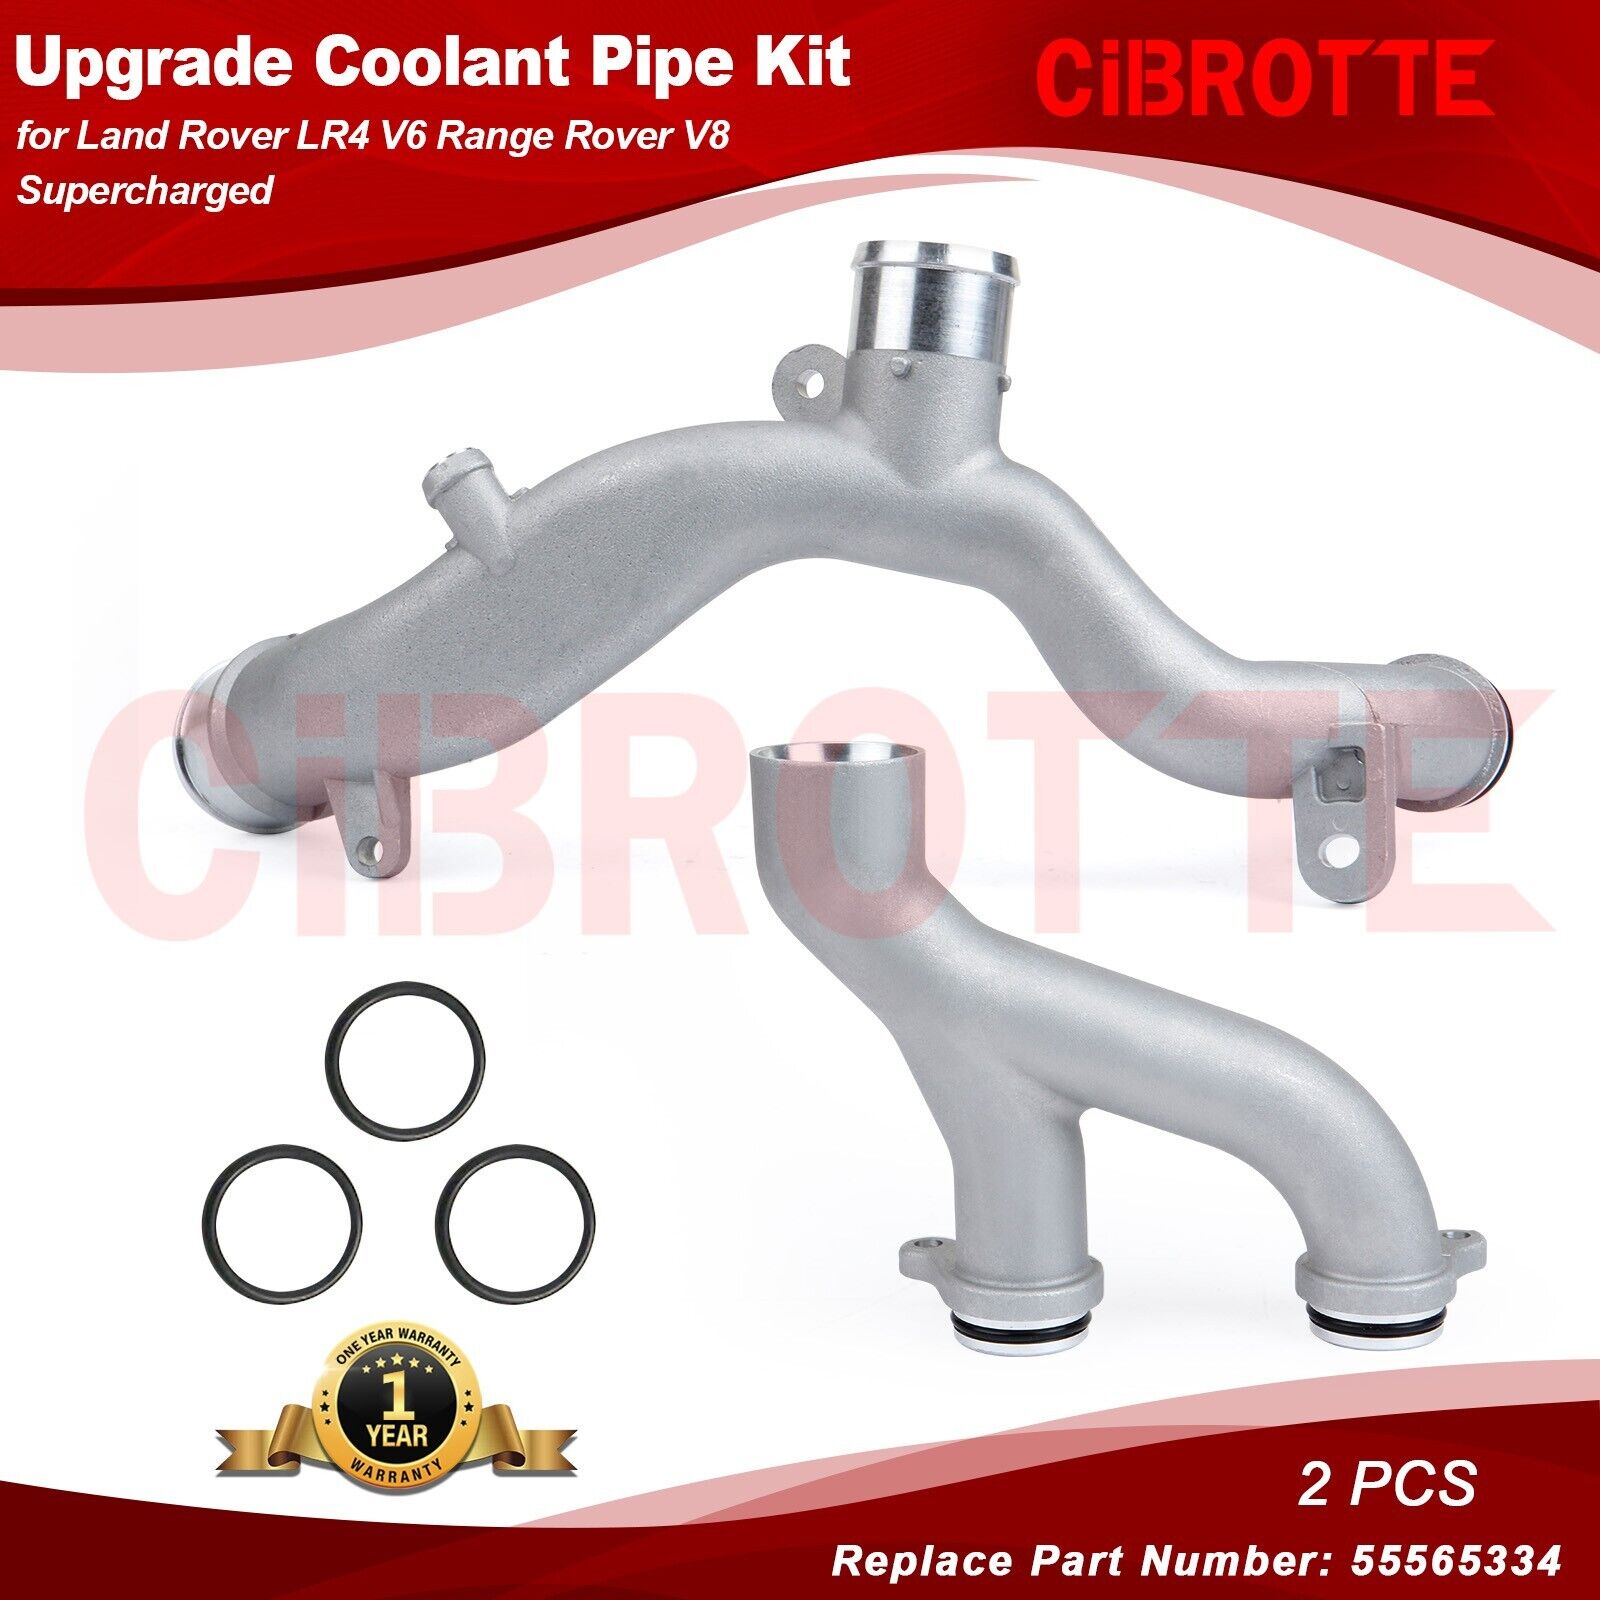 Upgrade Coolant Pipe Kit for Land Rover LR4 3.0L Range Rover 5.0L Supercharged